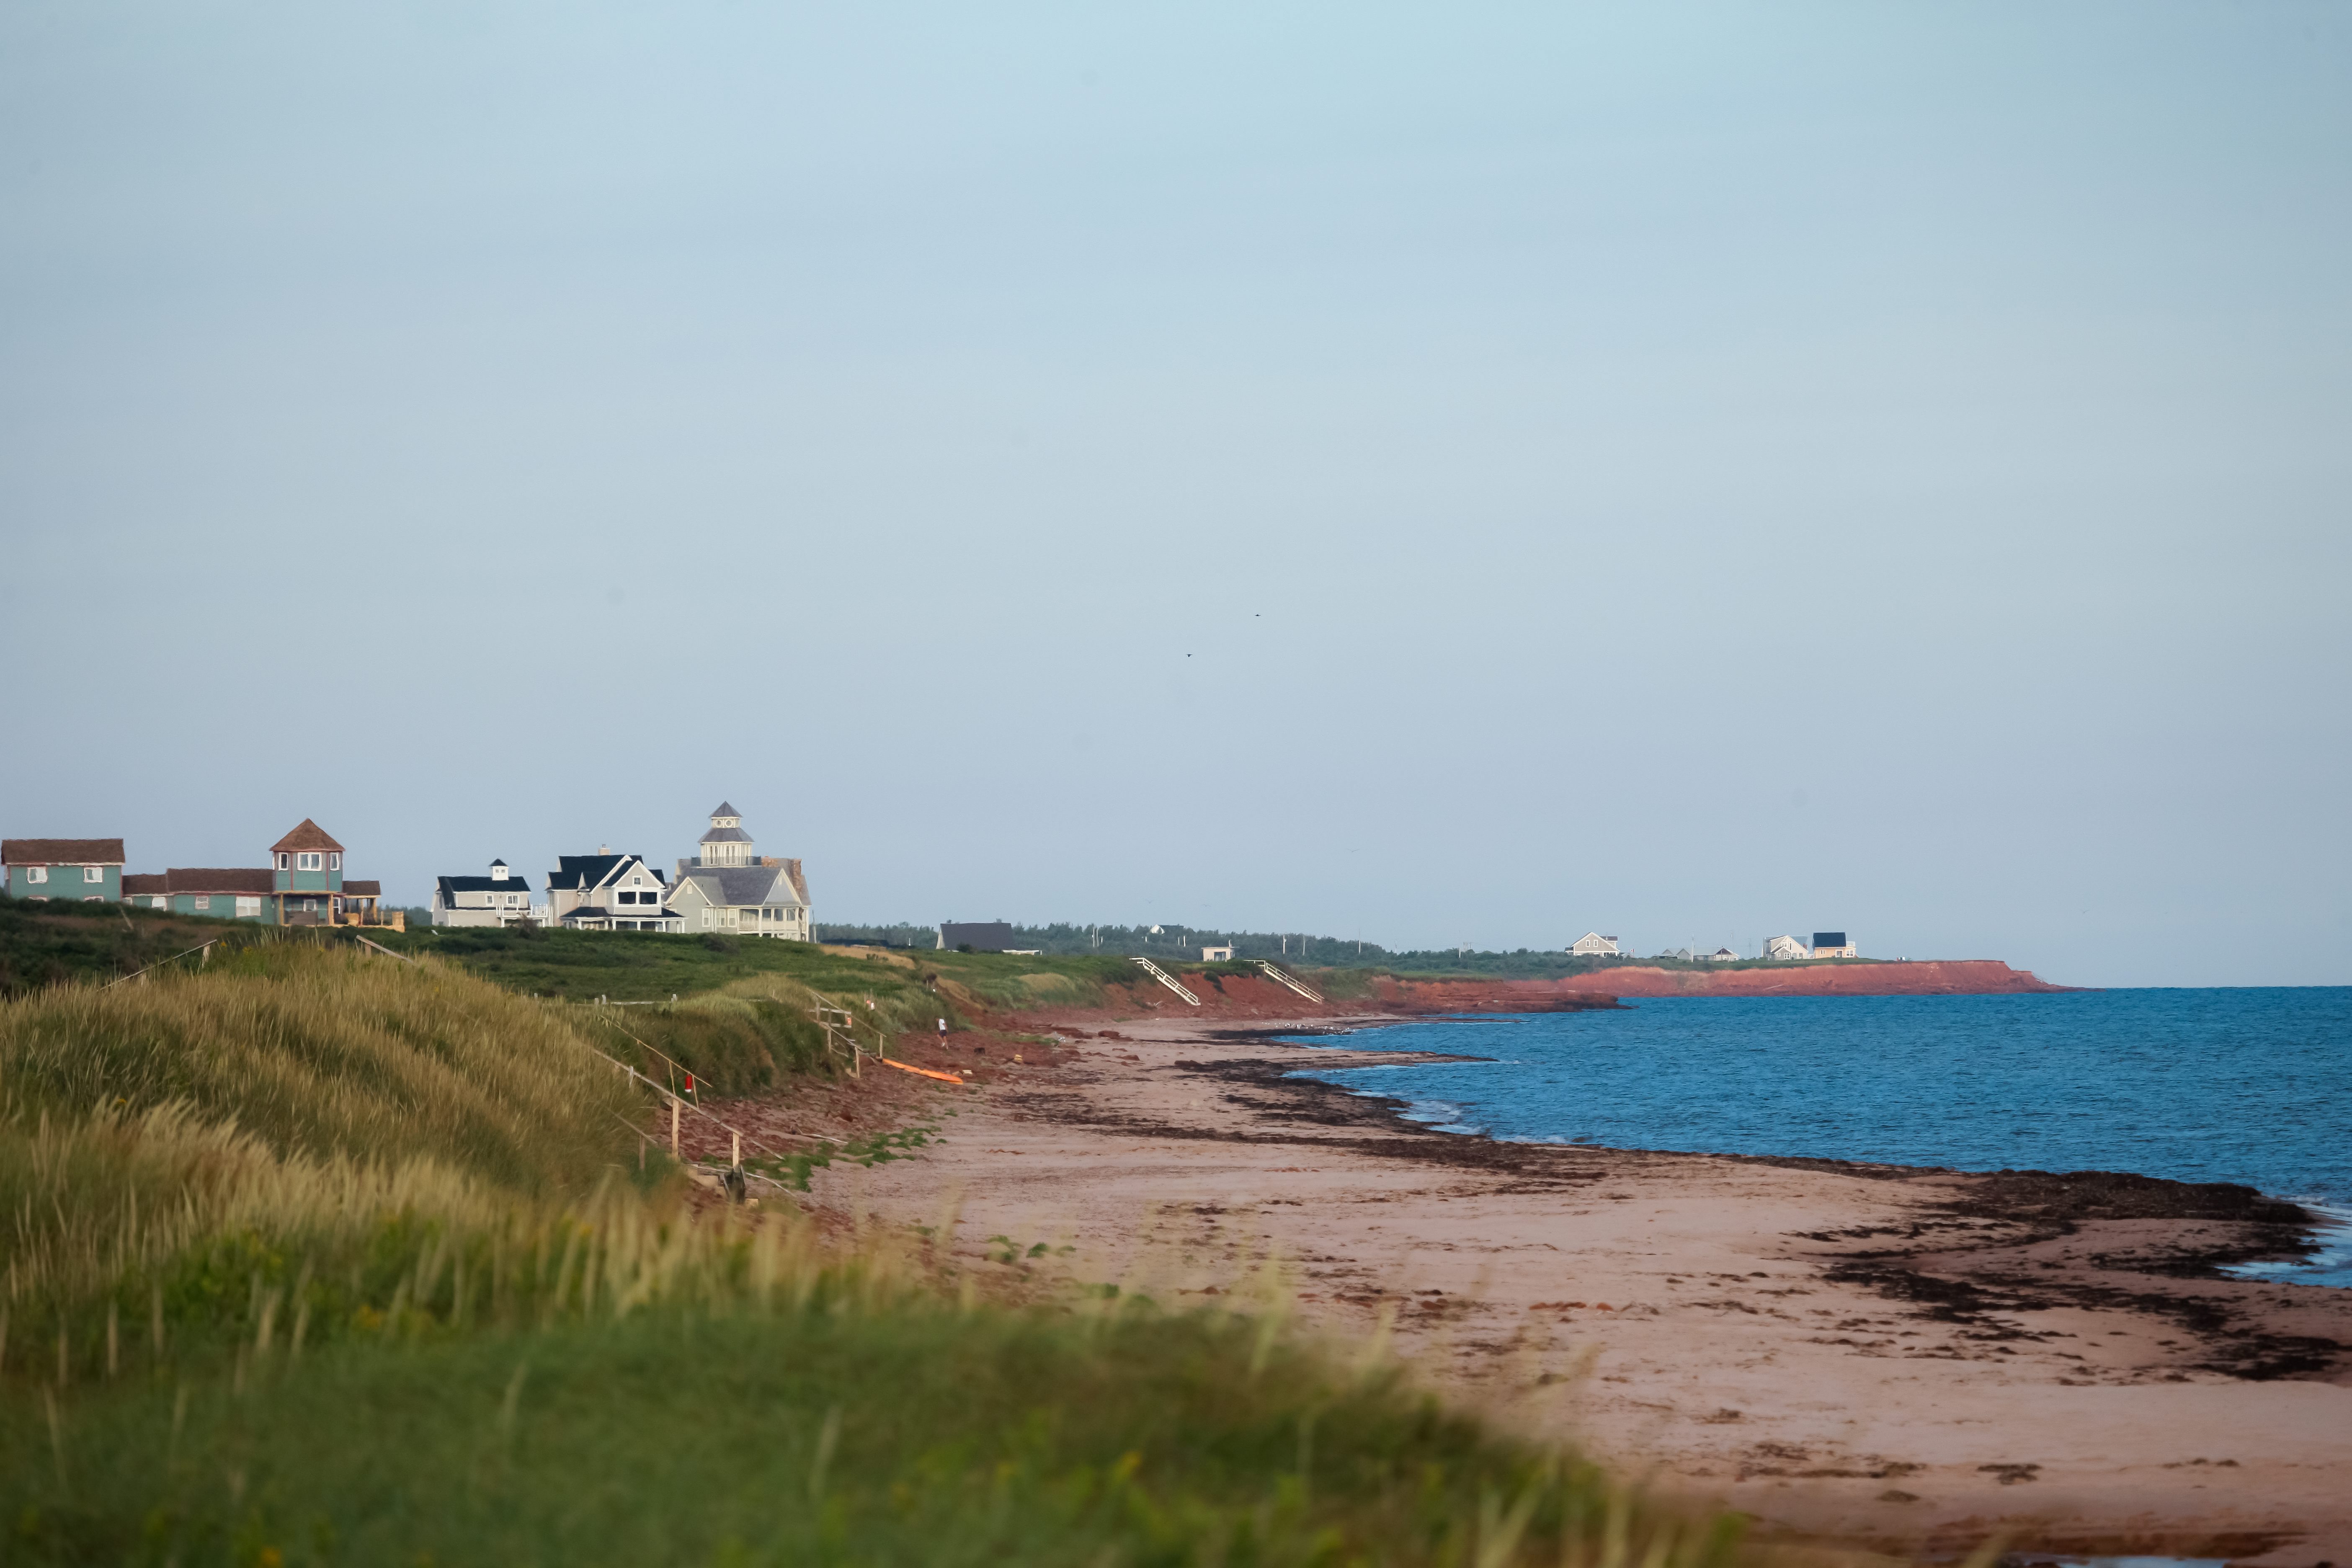 Human remains found on PEI coast could be from bygone shipwreck: RCMP